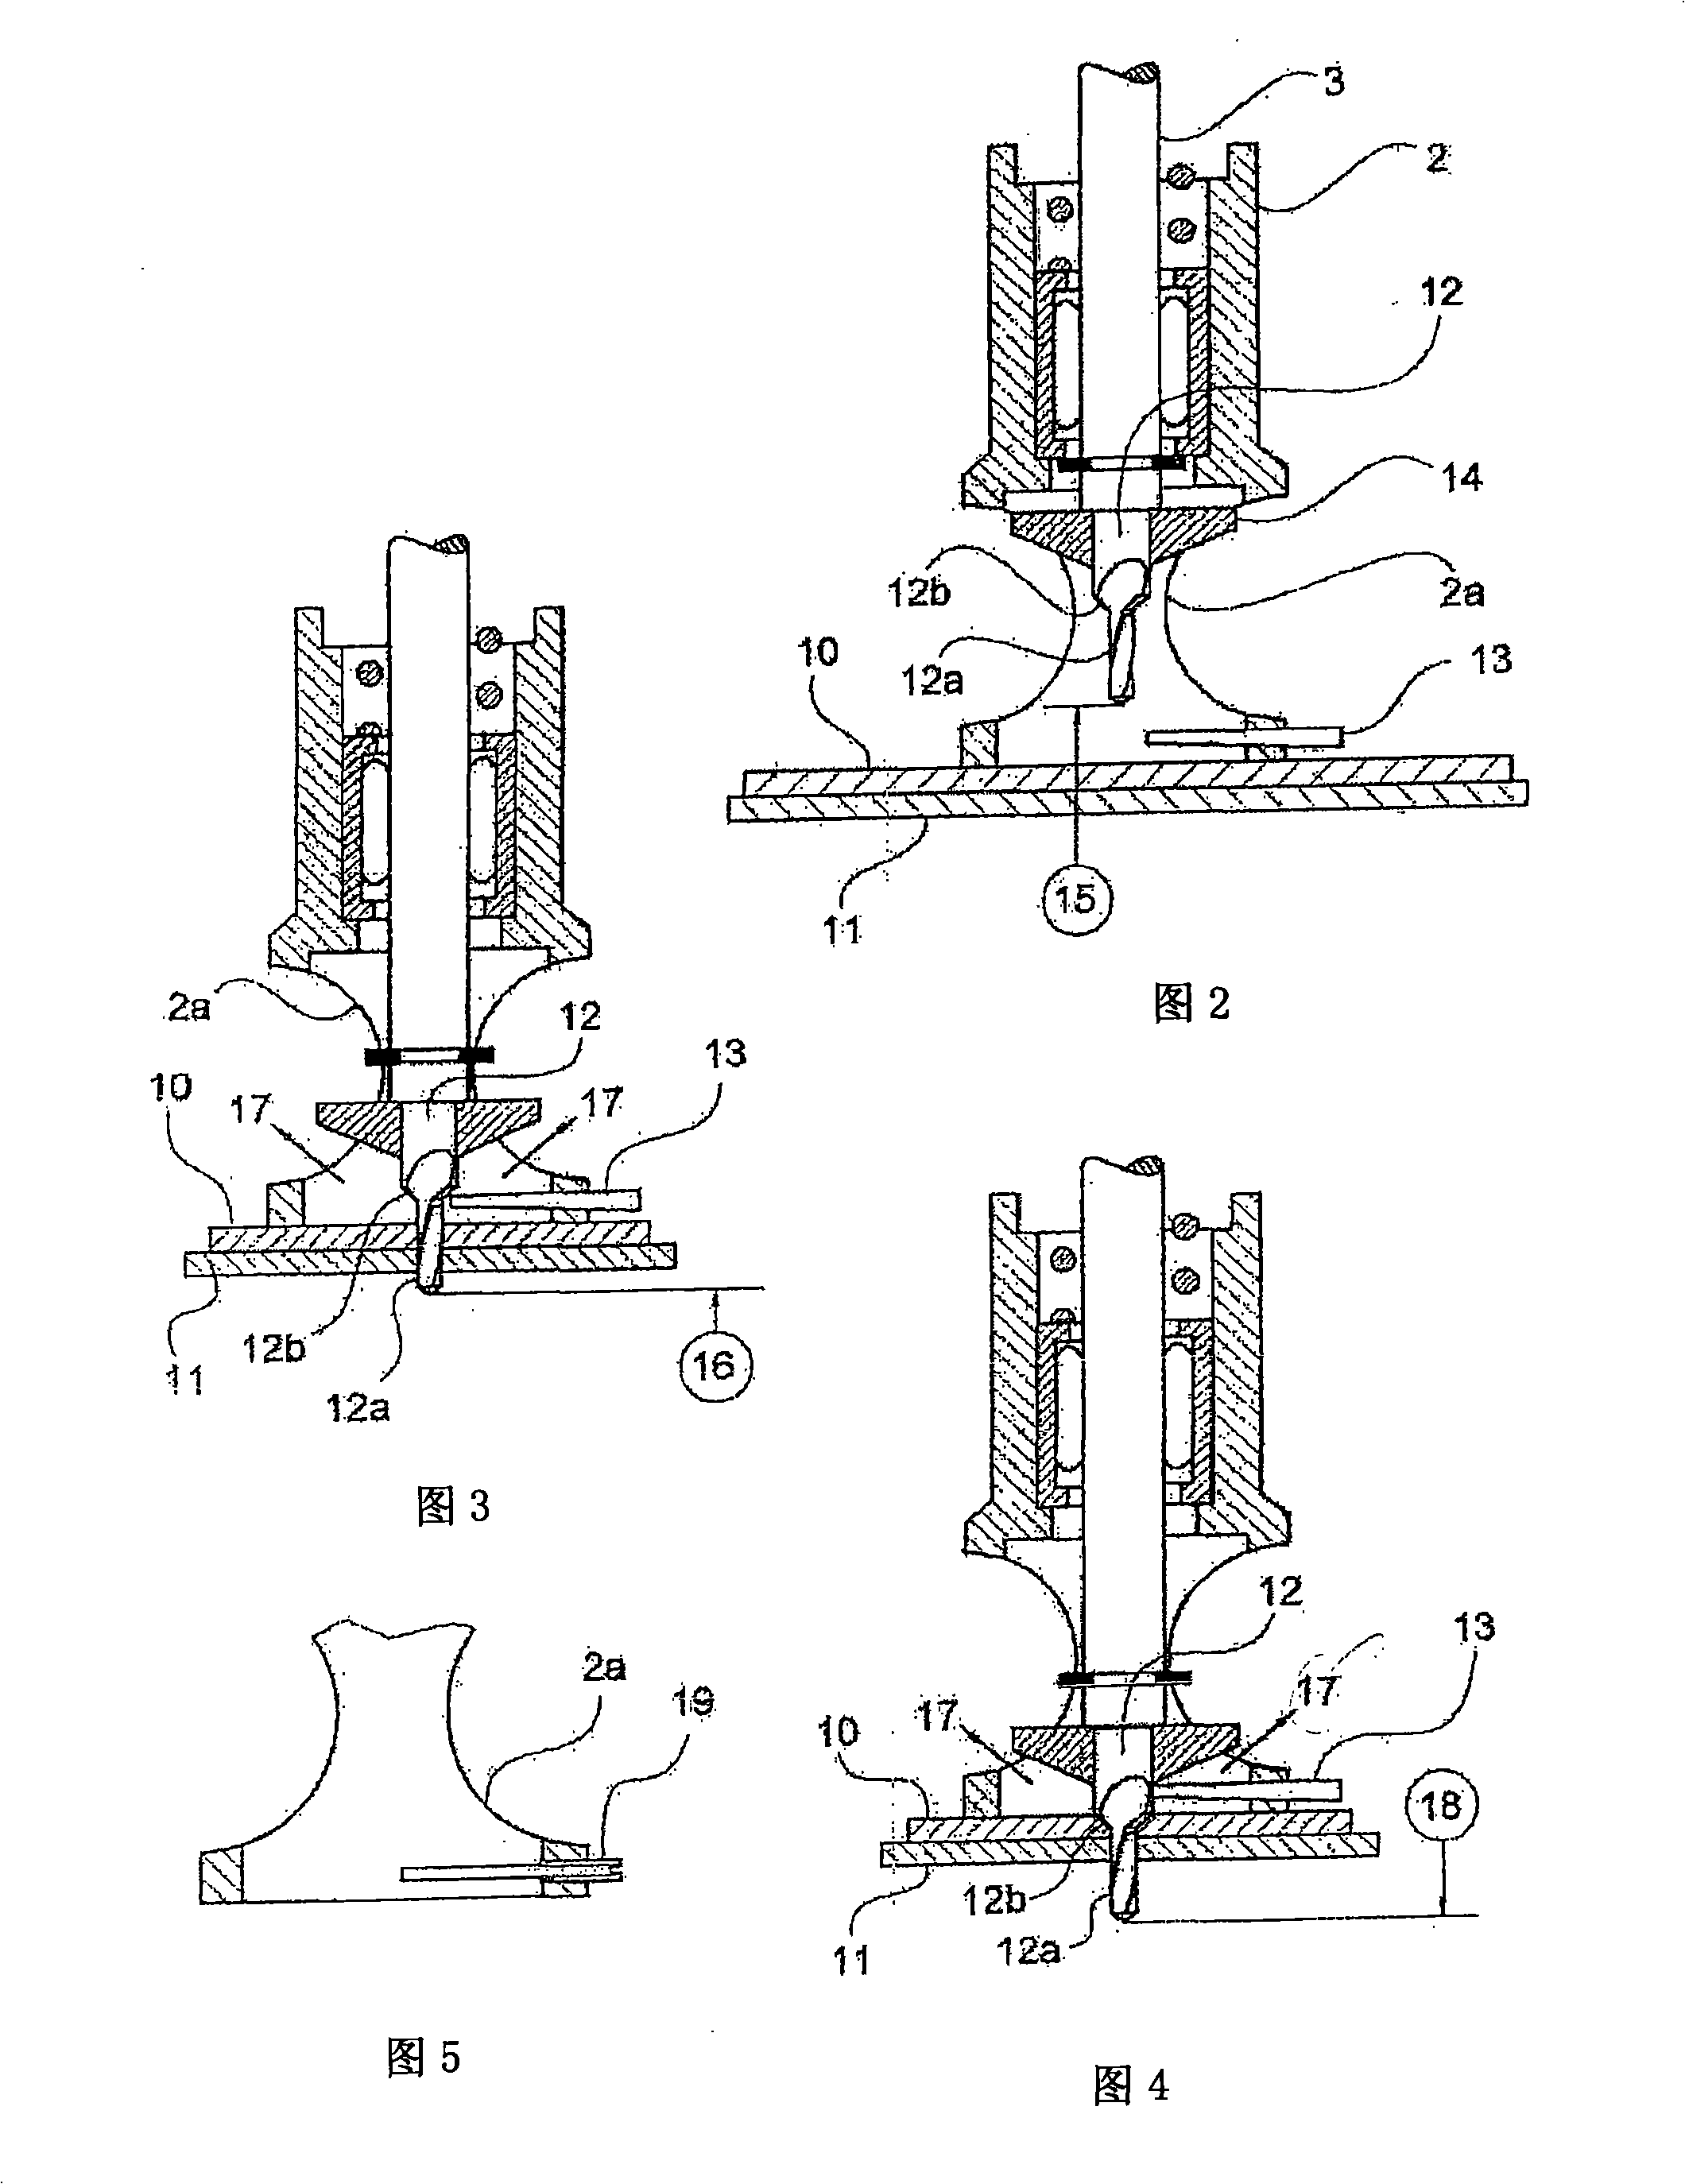 Device for limiting the advance during a drilling operation